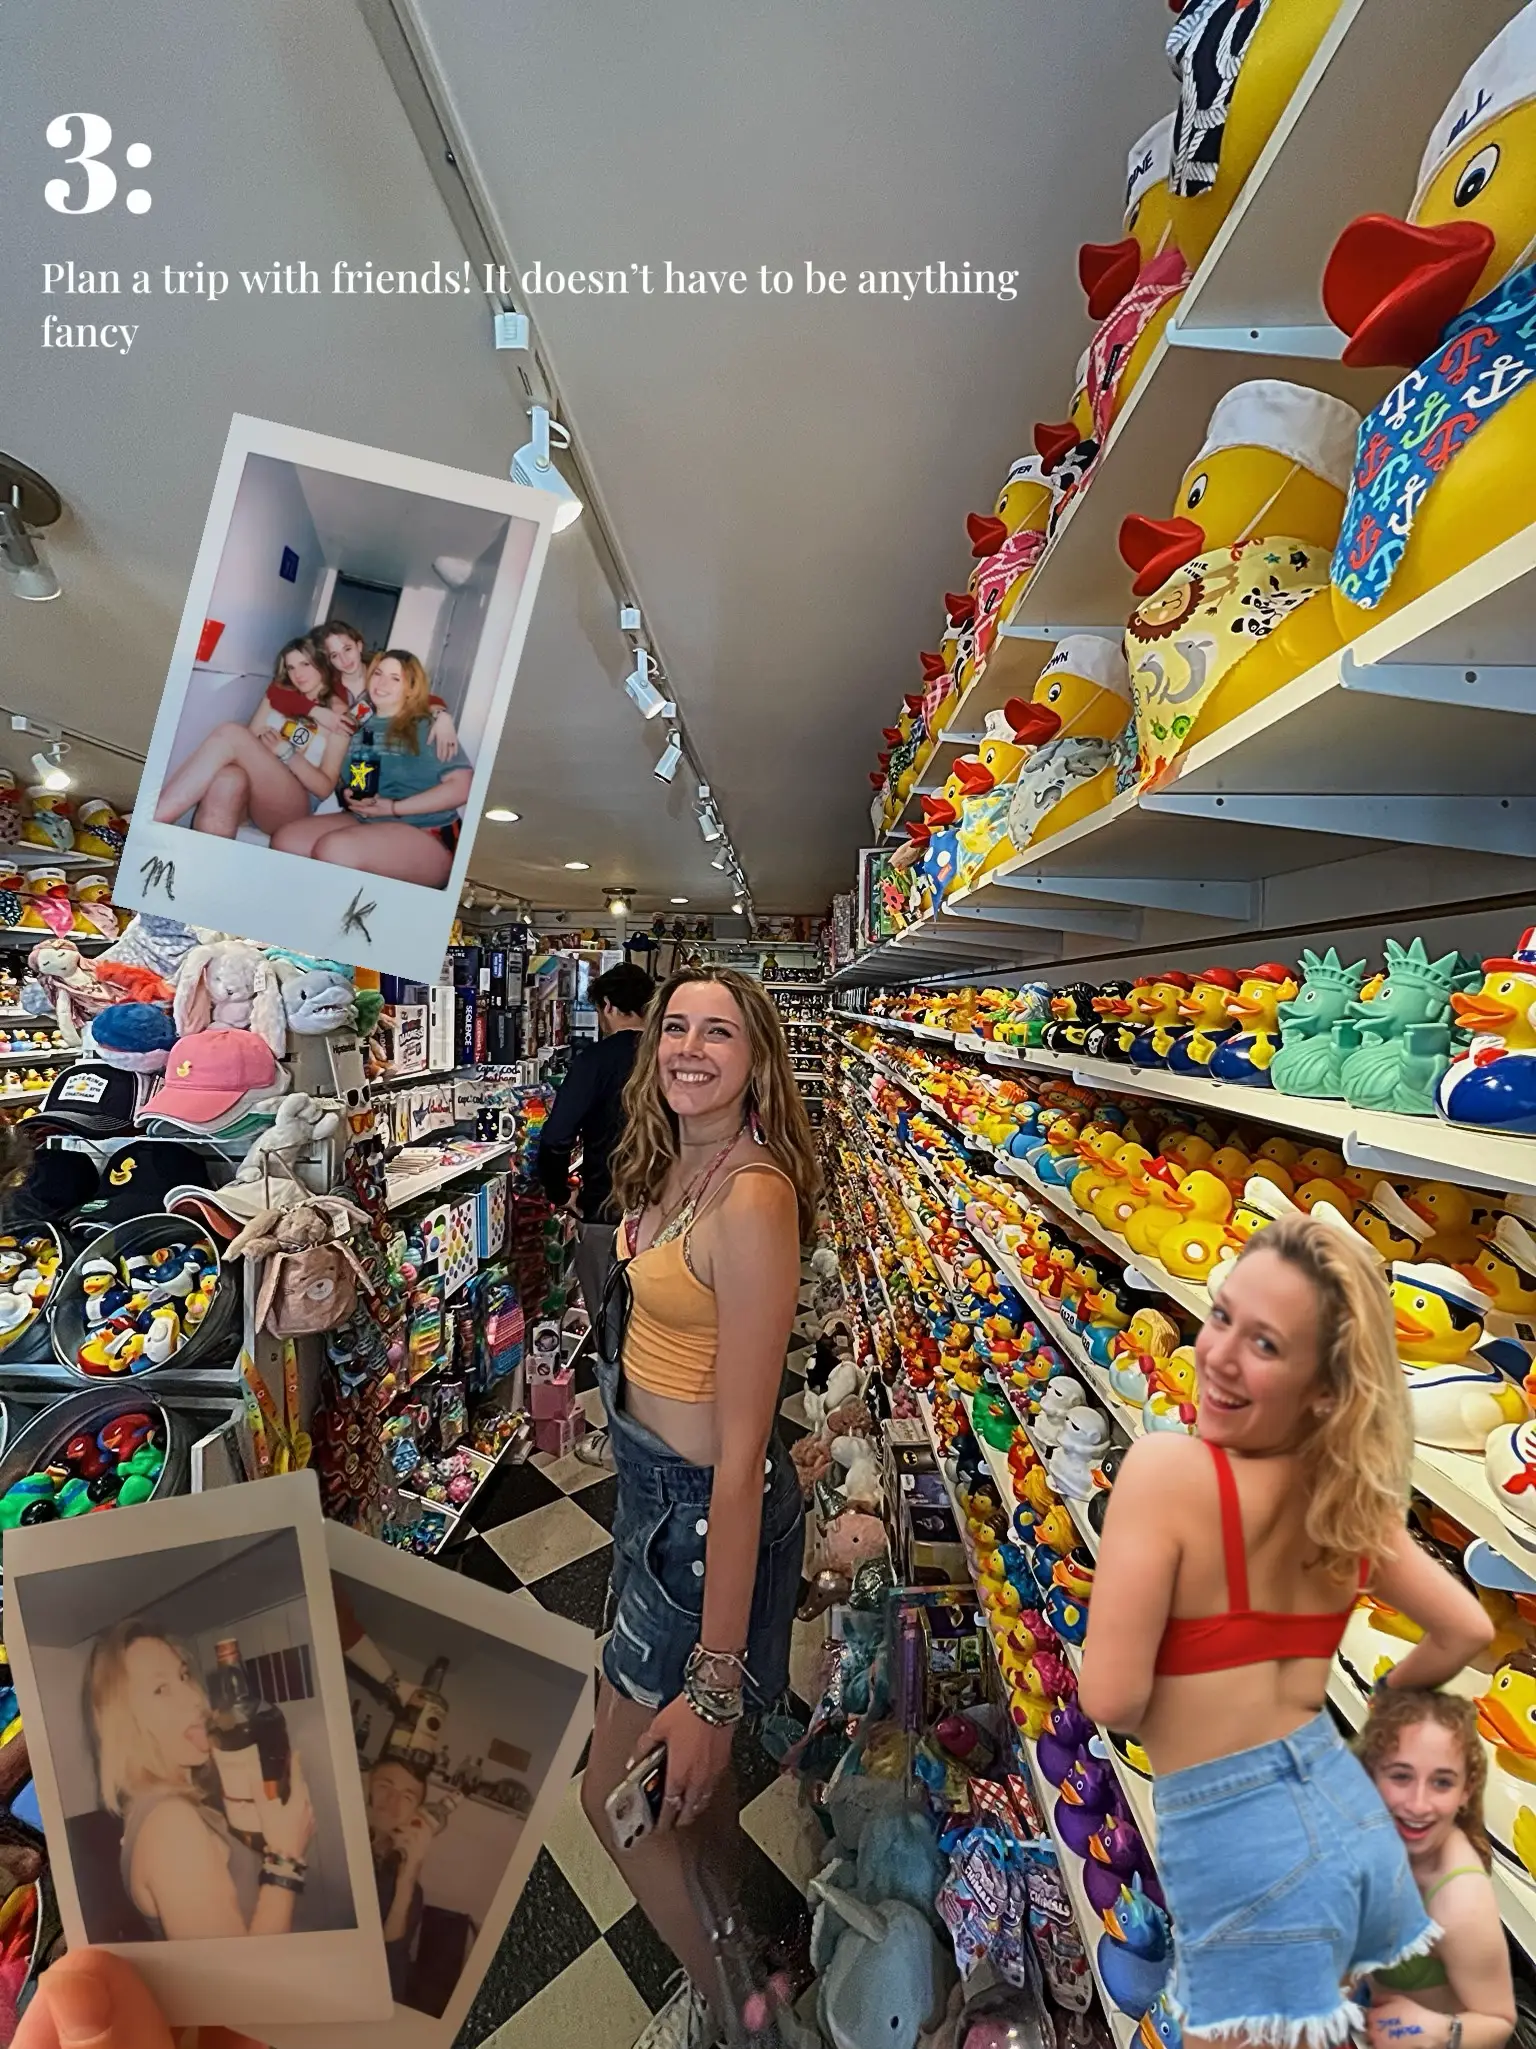  A collage of pictures of a woman and a child are displayed in a store.